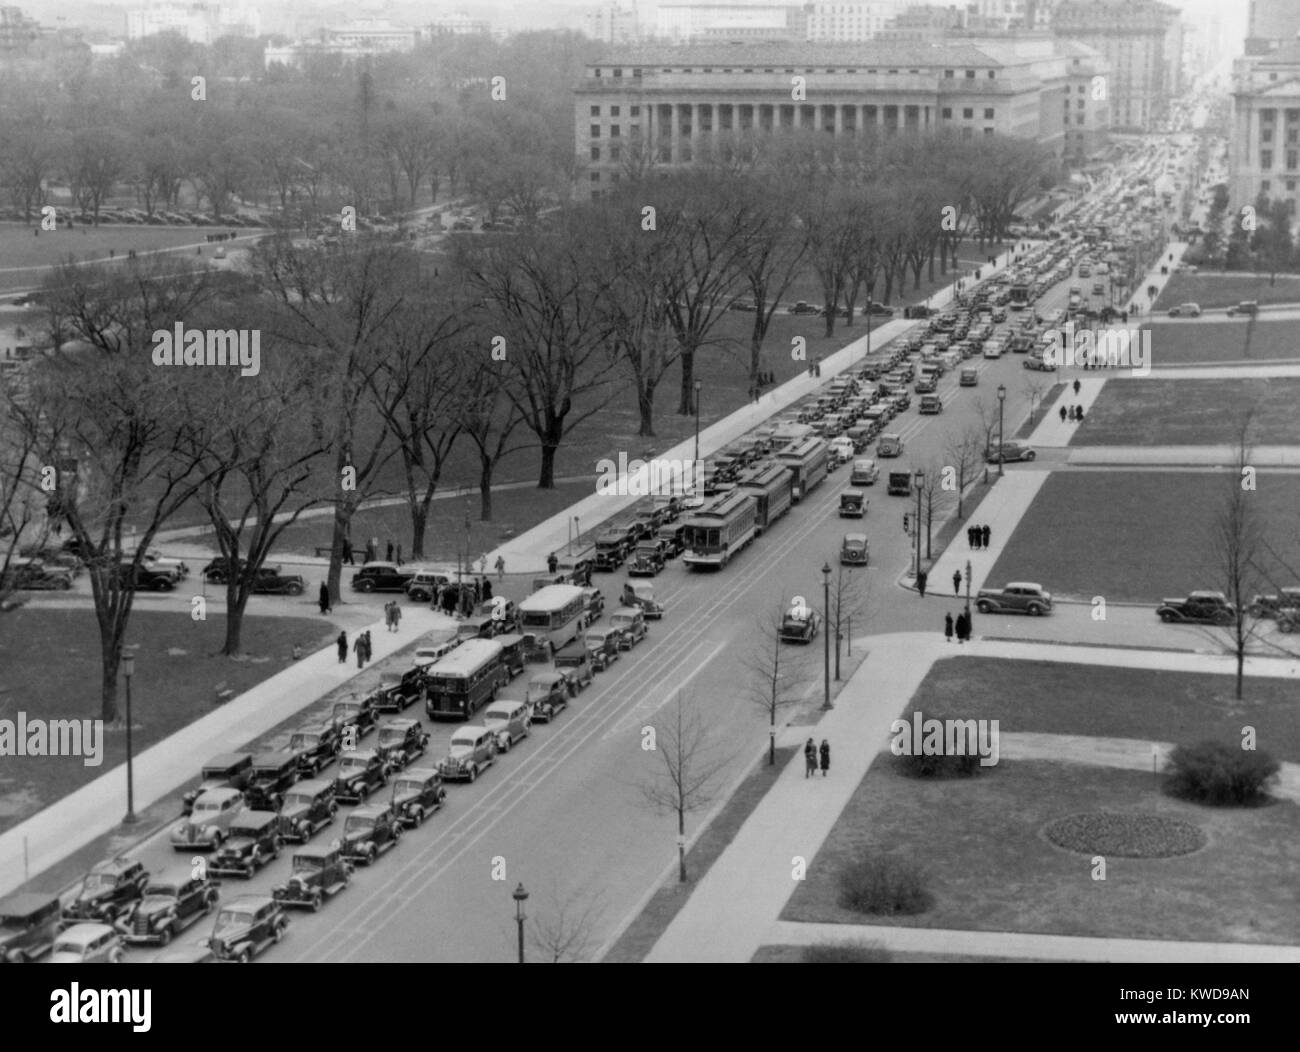 Washington D.C. traffic jam at 14th St. and the Mall, April 1937 (BSLOC 2016 10 119) Stock Photo